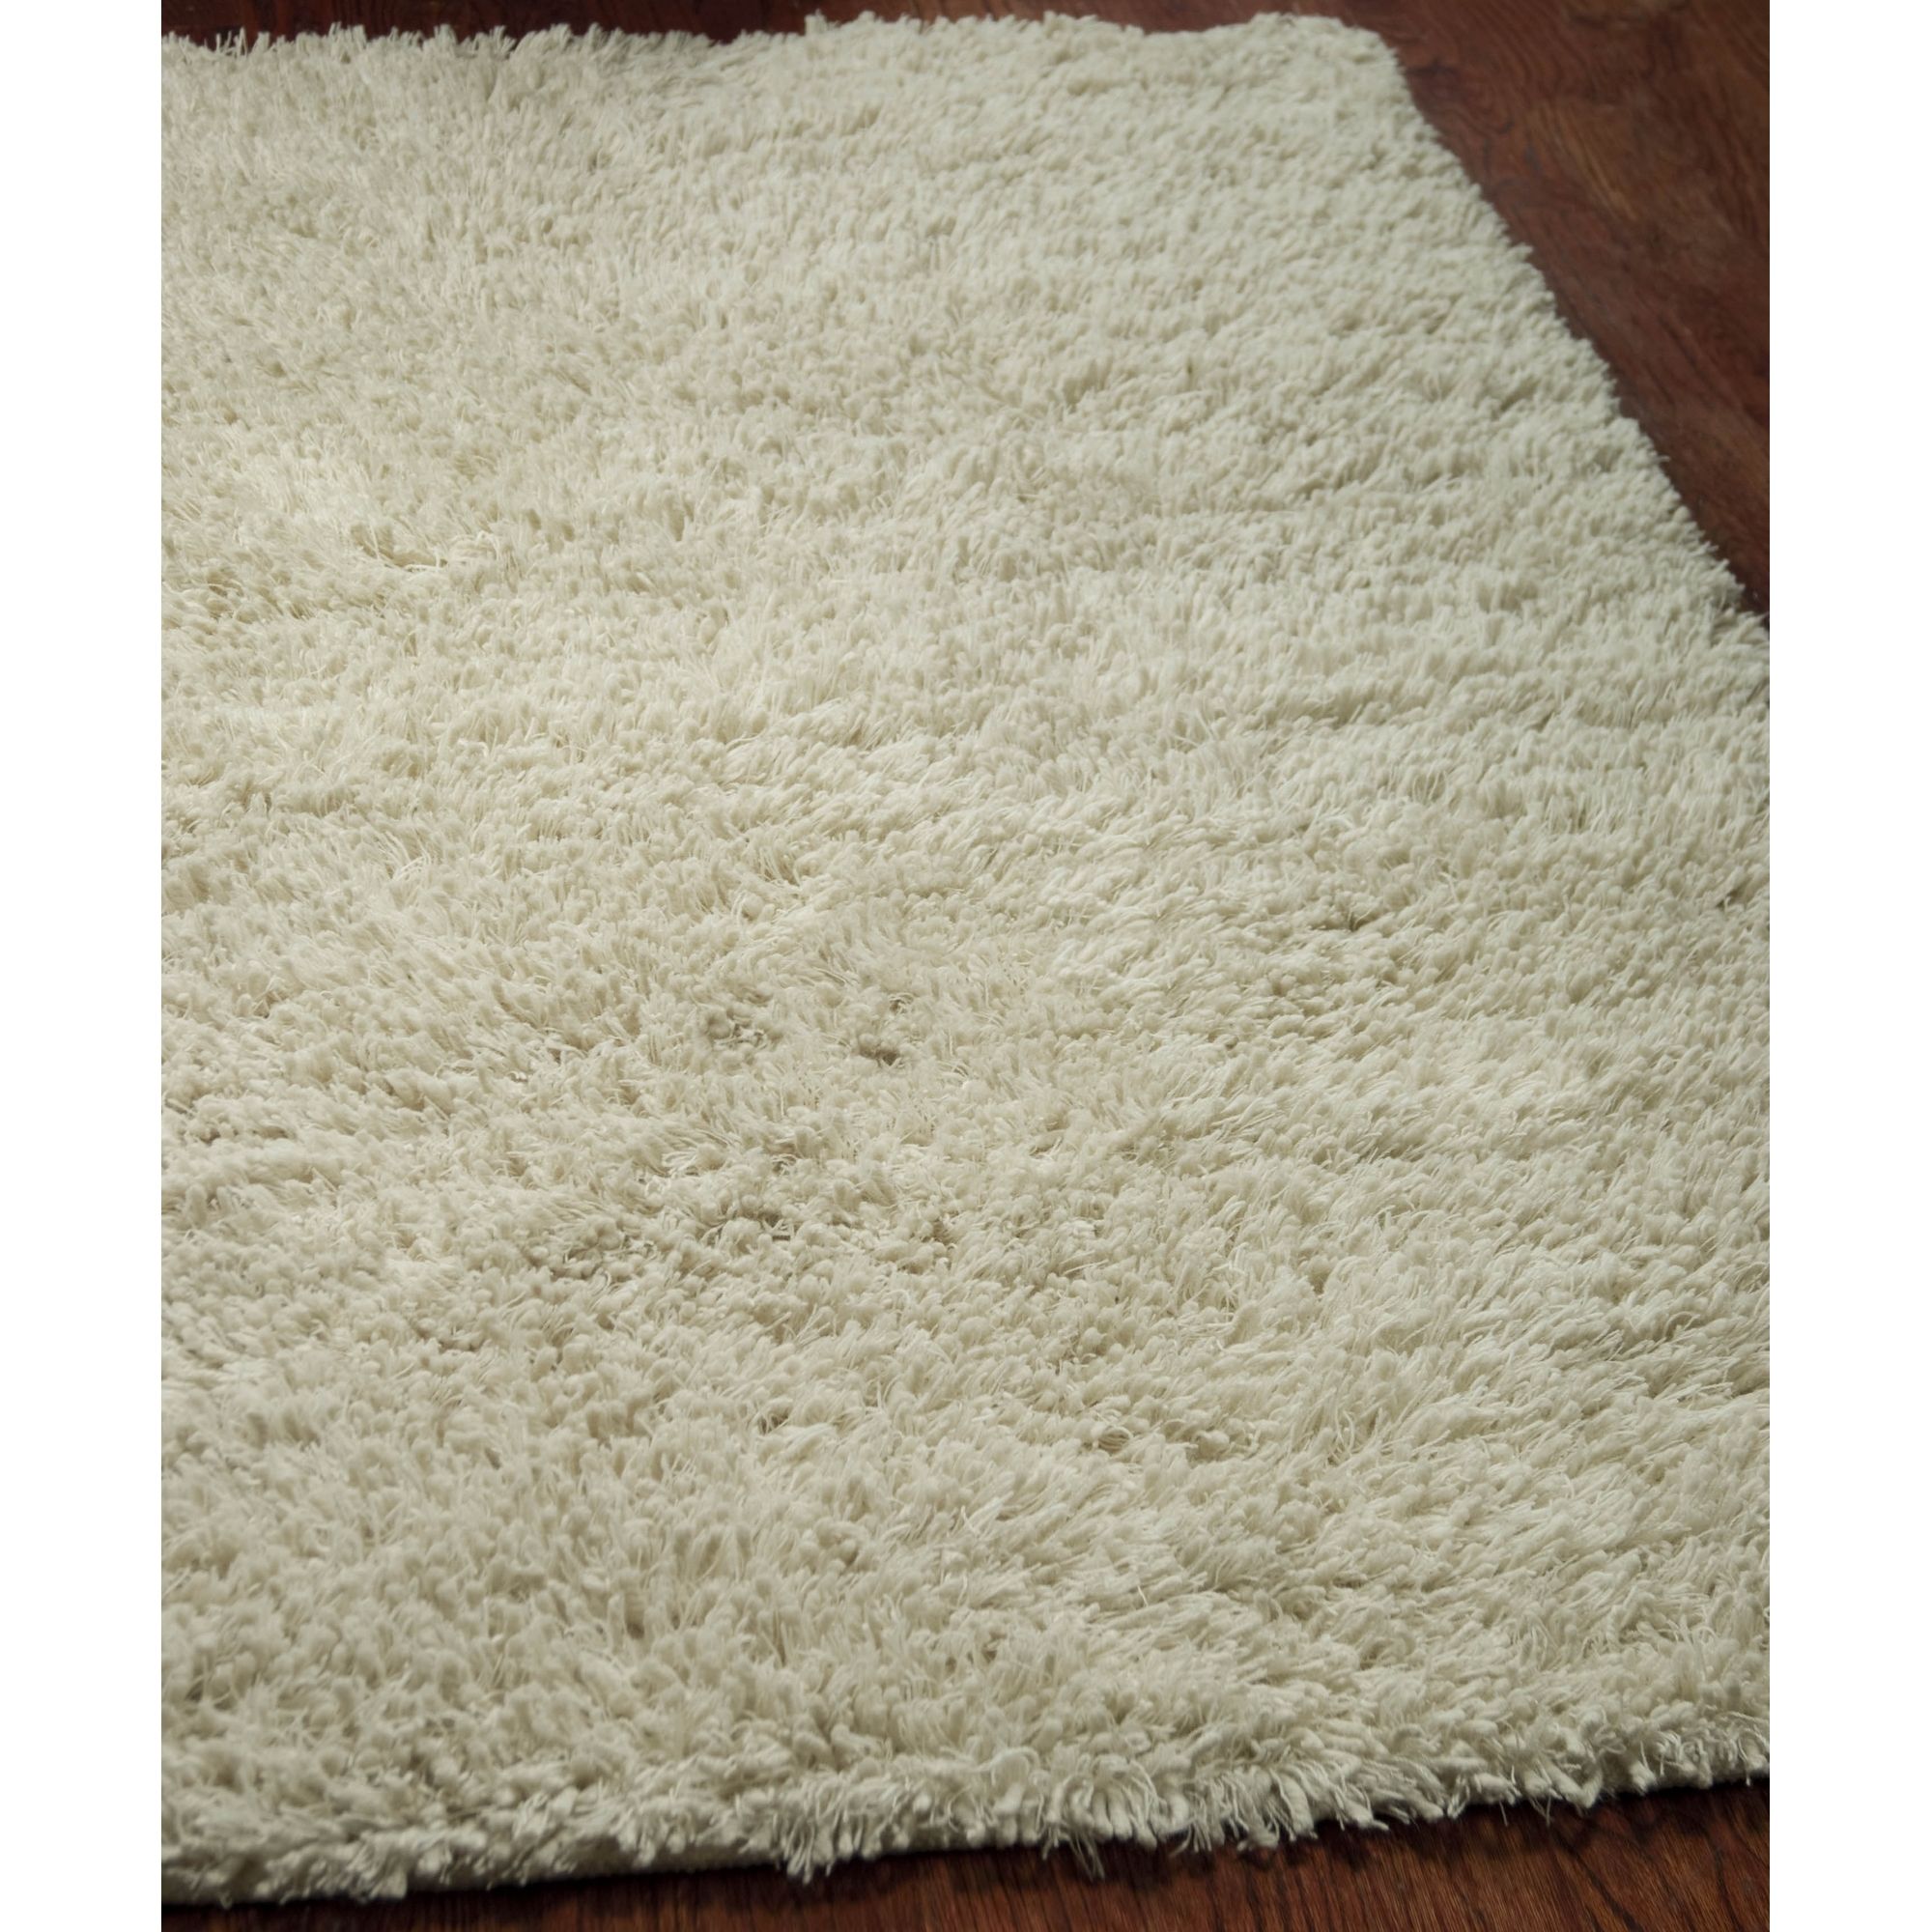 Safavieh Hand Tufted Ivory Plush Shag Wool Area Rugs Sg731a Ebay Intended For Wool Shag Area Rugs (View 5 of 15)